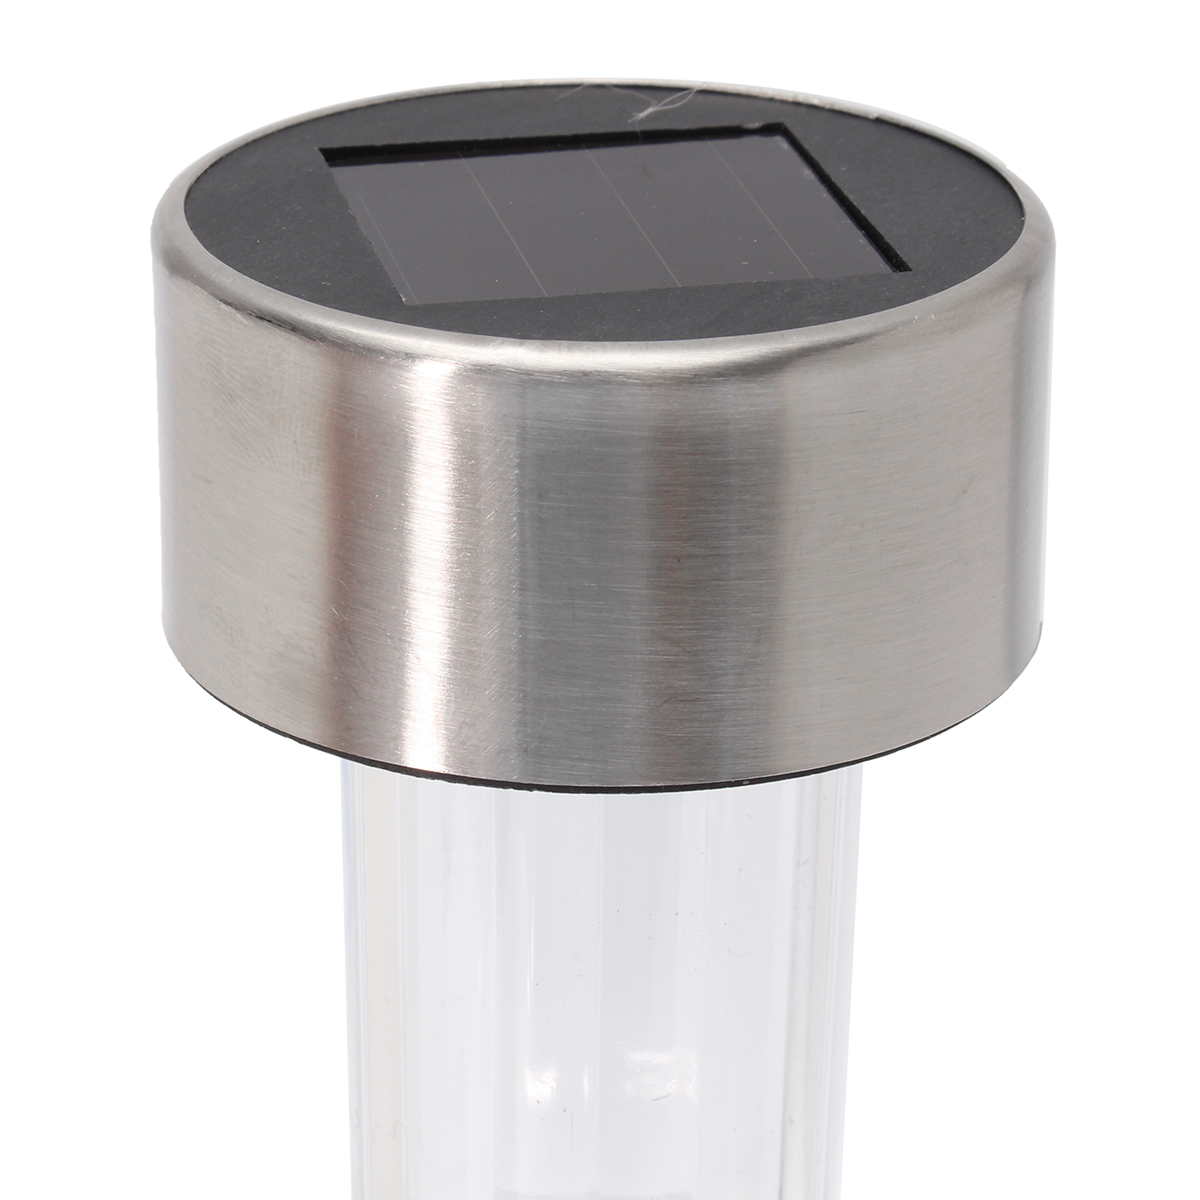 Solar-Powered-LED-Lawn-Light-Post-Stake-Patio-Outdoor-Stainless-Steel-Garden-Lamp-1706586-7